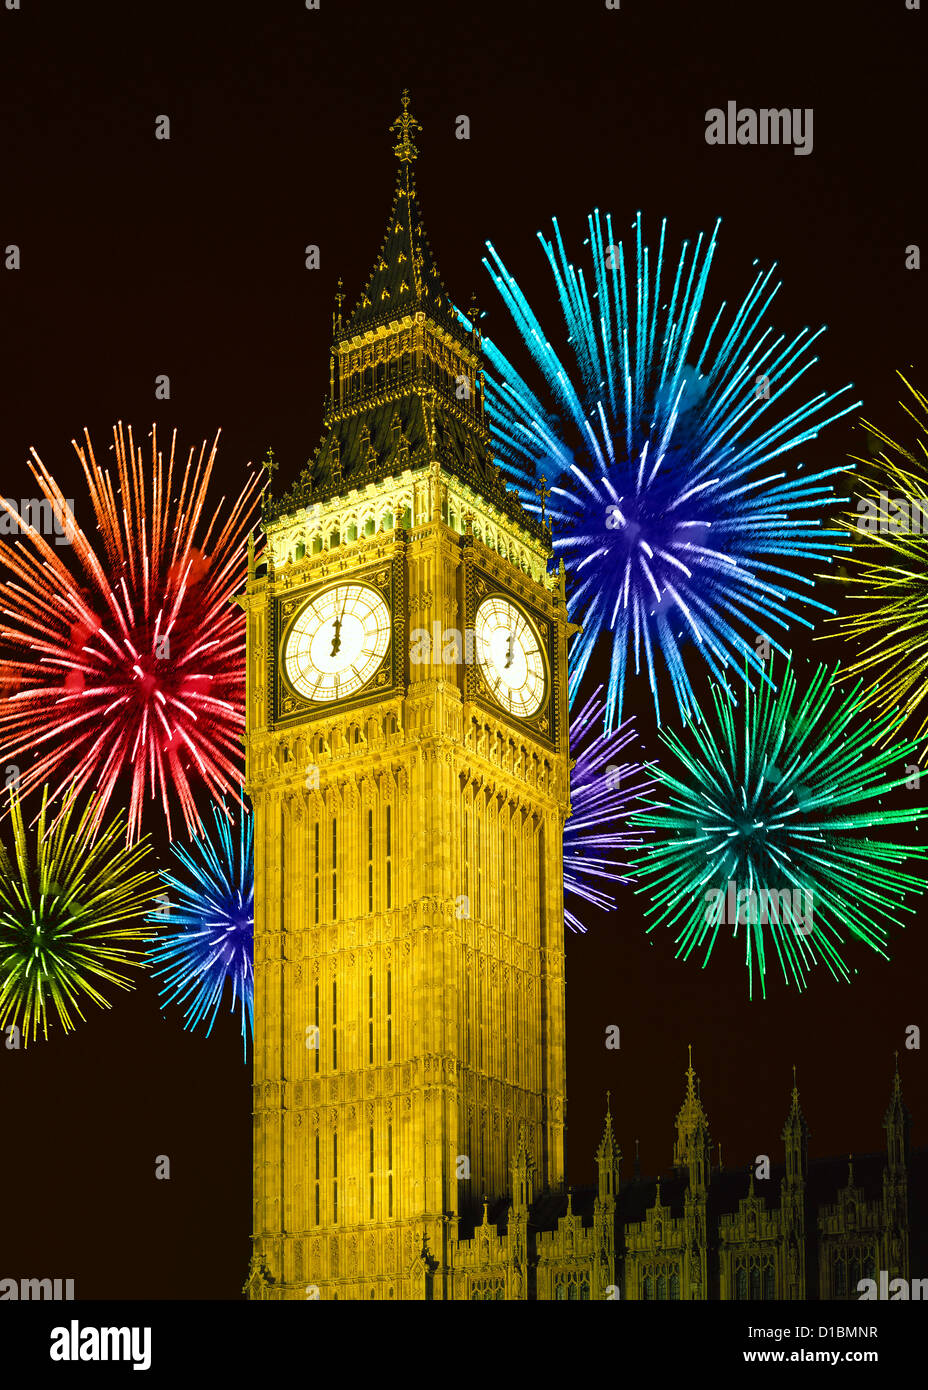 Fireworks above Big Ben in London Stock Photo